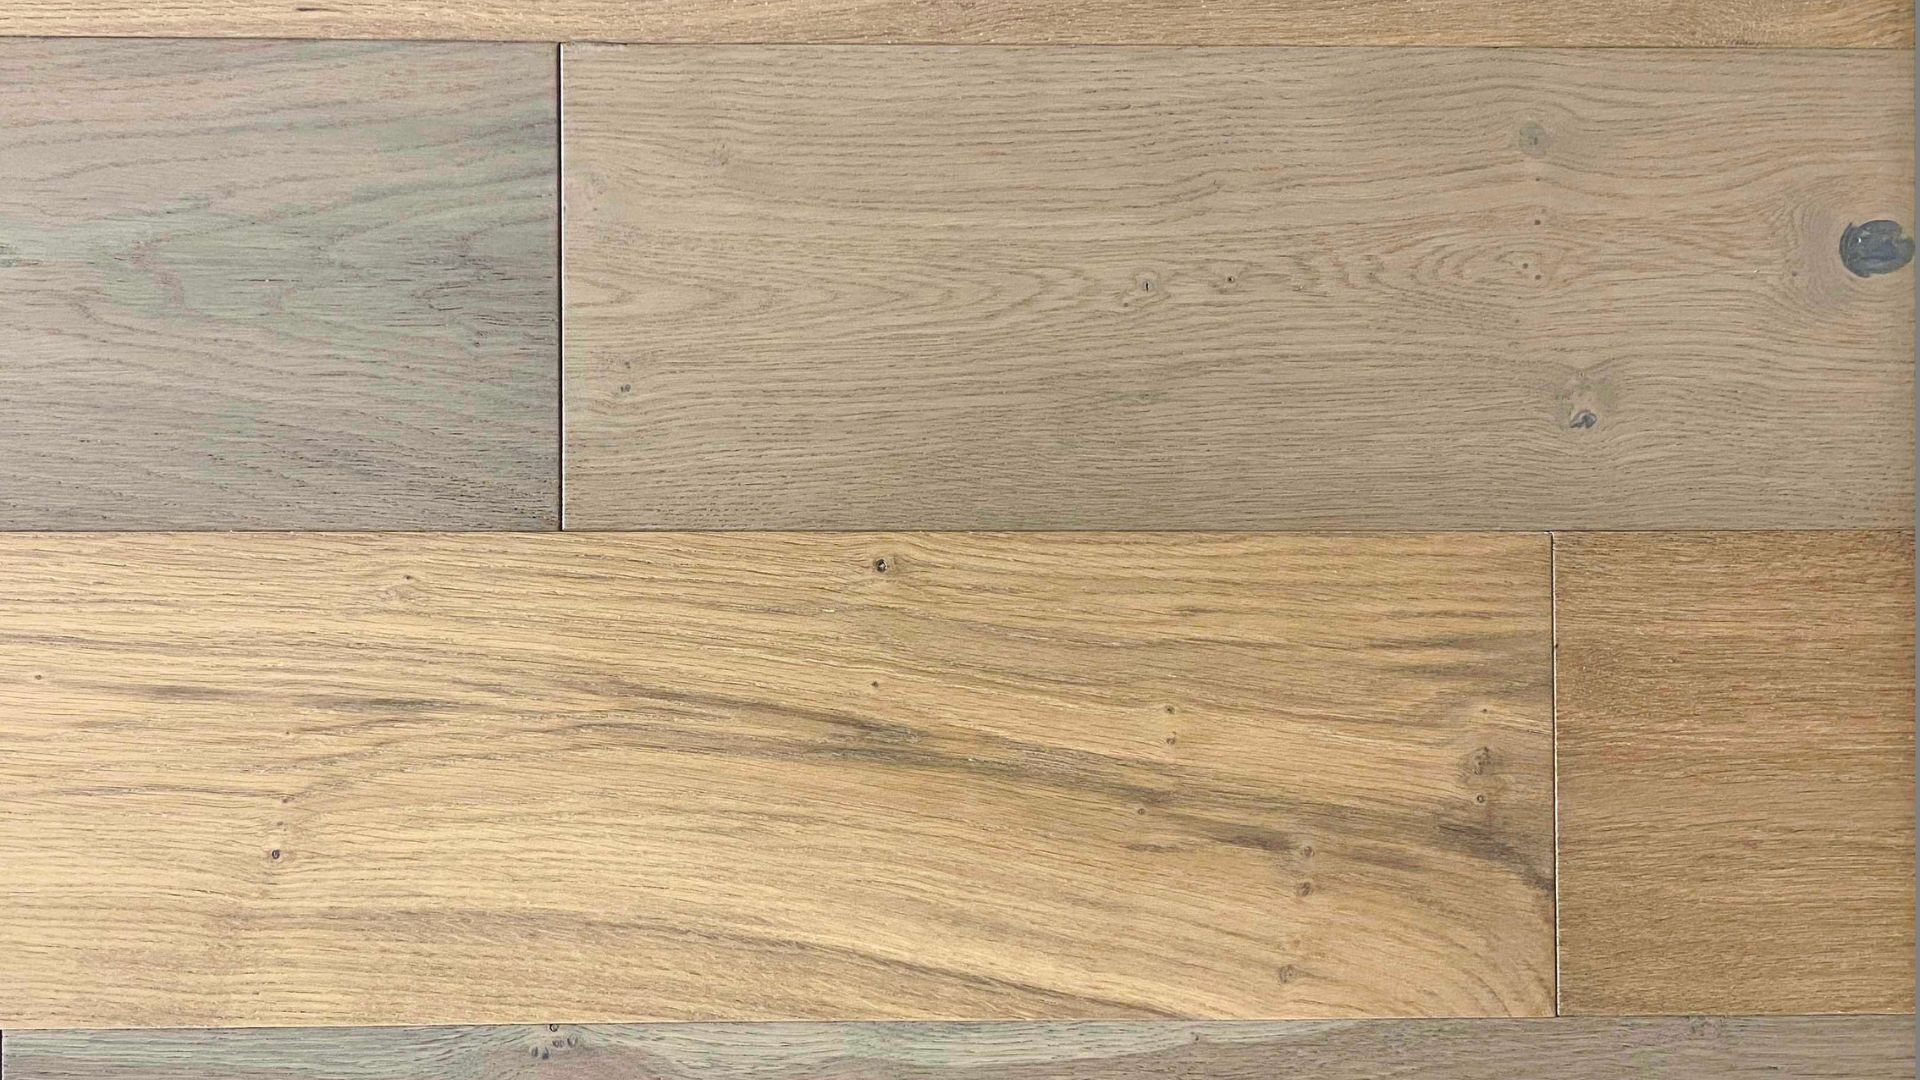 This image presents a selection of hardwood flooring options, highlighting the diverse range of colors and grain patterns available from a contractor in Athens, Georgia. The top half shows two lighter wood planks with subtle grain details, while the bottom half displays richer, more pronounced grain patterns on darker wood. The samples are placed adjacent to each other for direct comparison, showcasing the natural beauty and texture that could complement a variety of interior designs and preferences. This collection is likely part of a showcase for potential clients to select the perfect hardwood flooring for their homes.